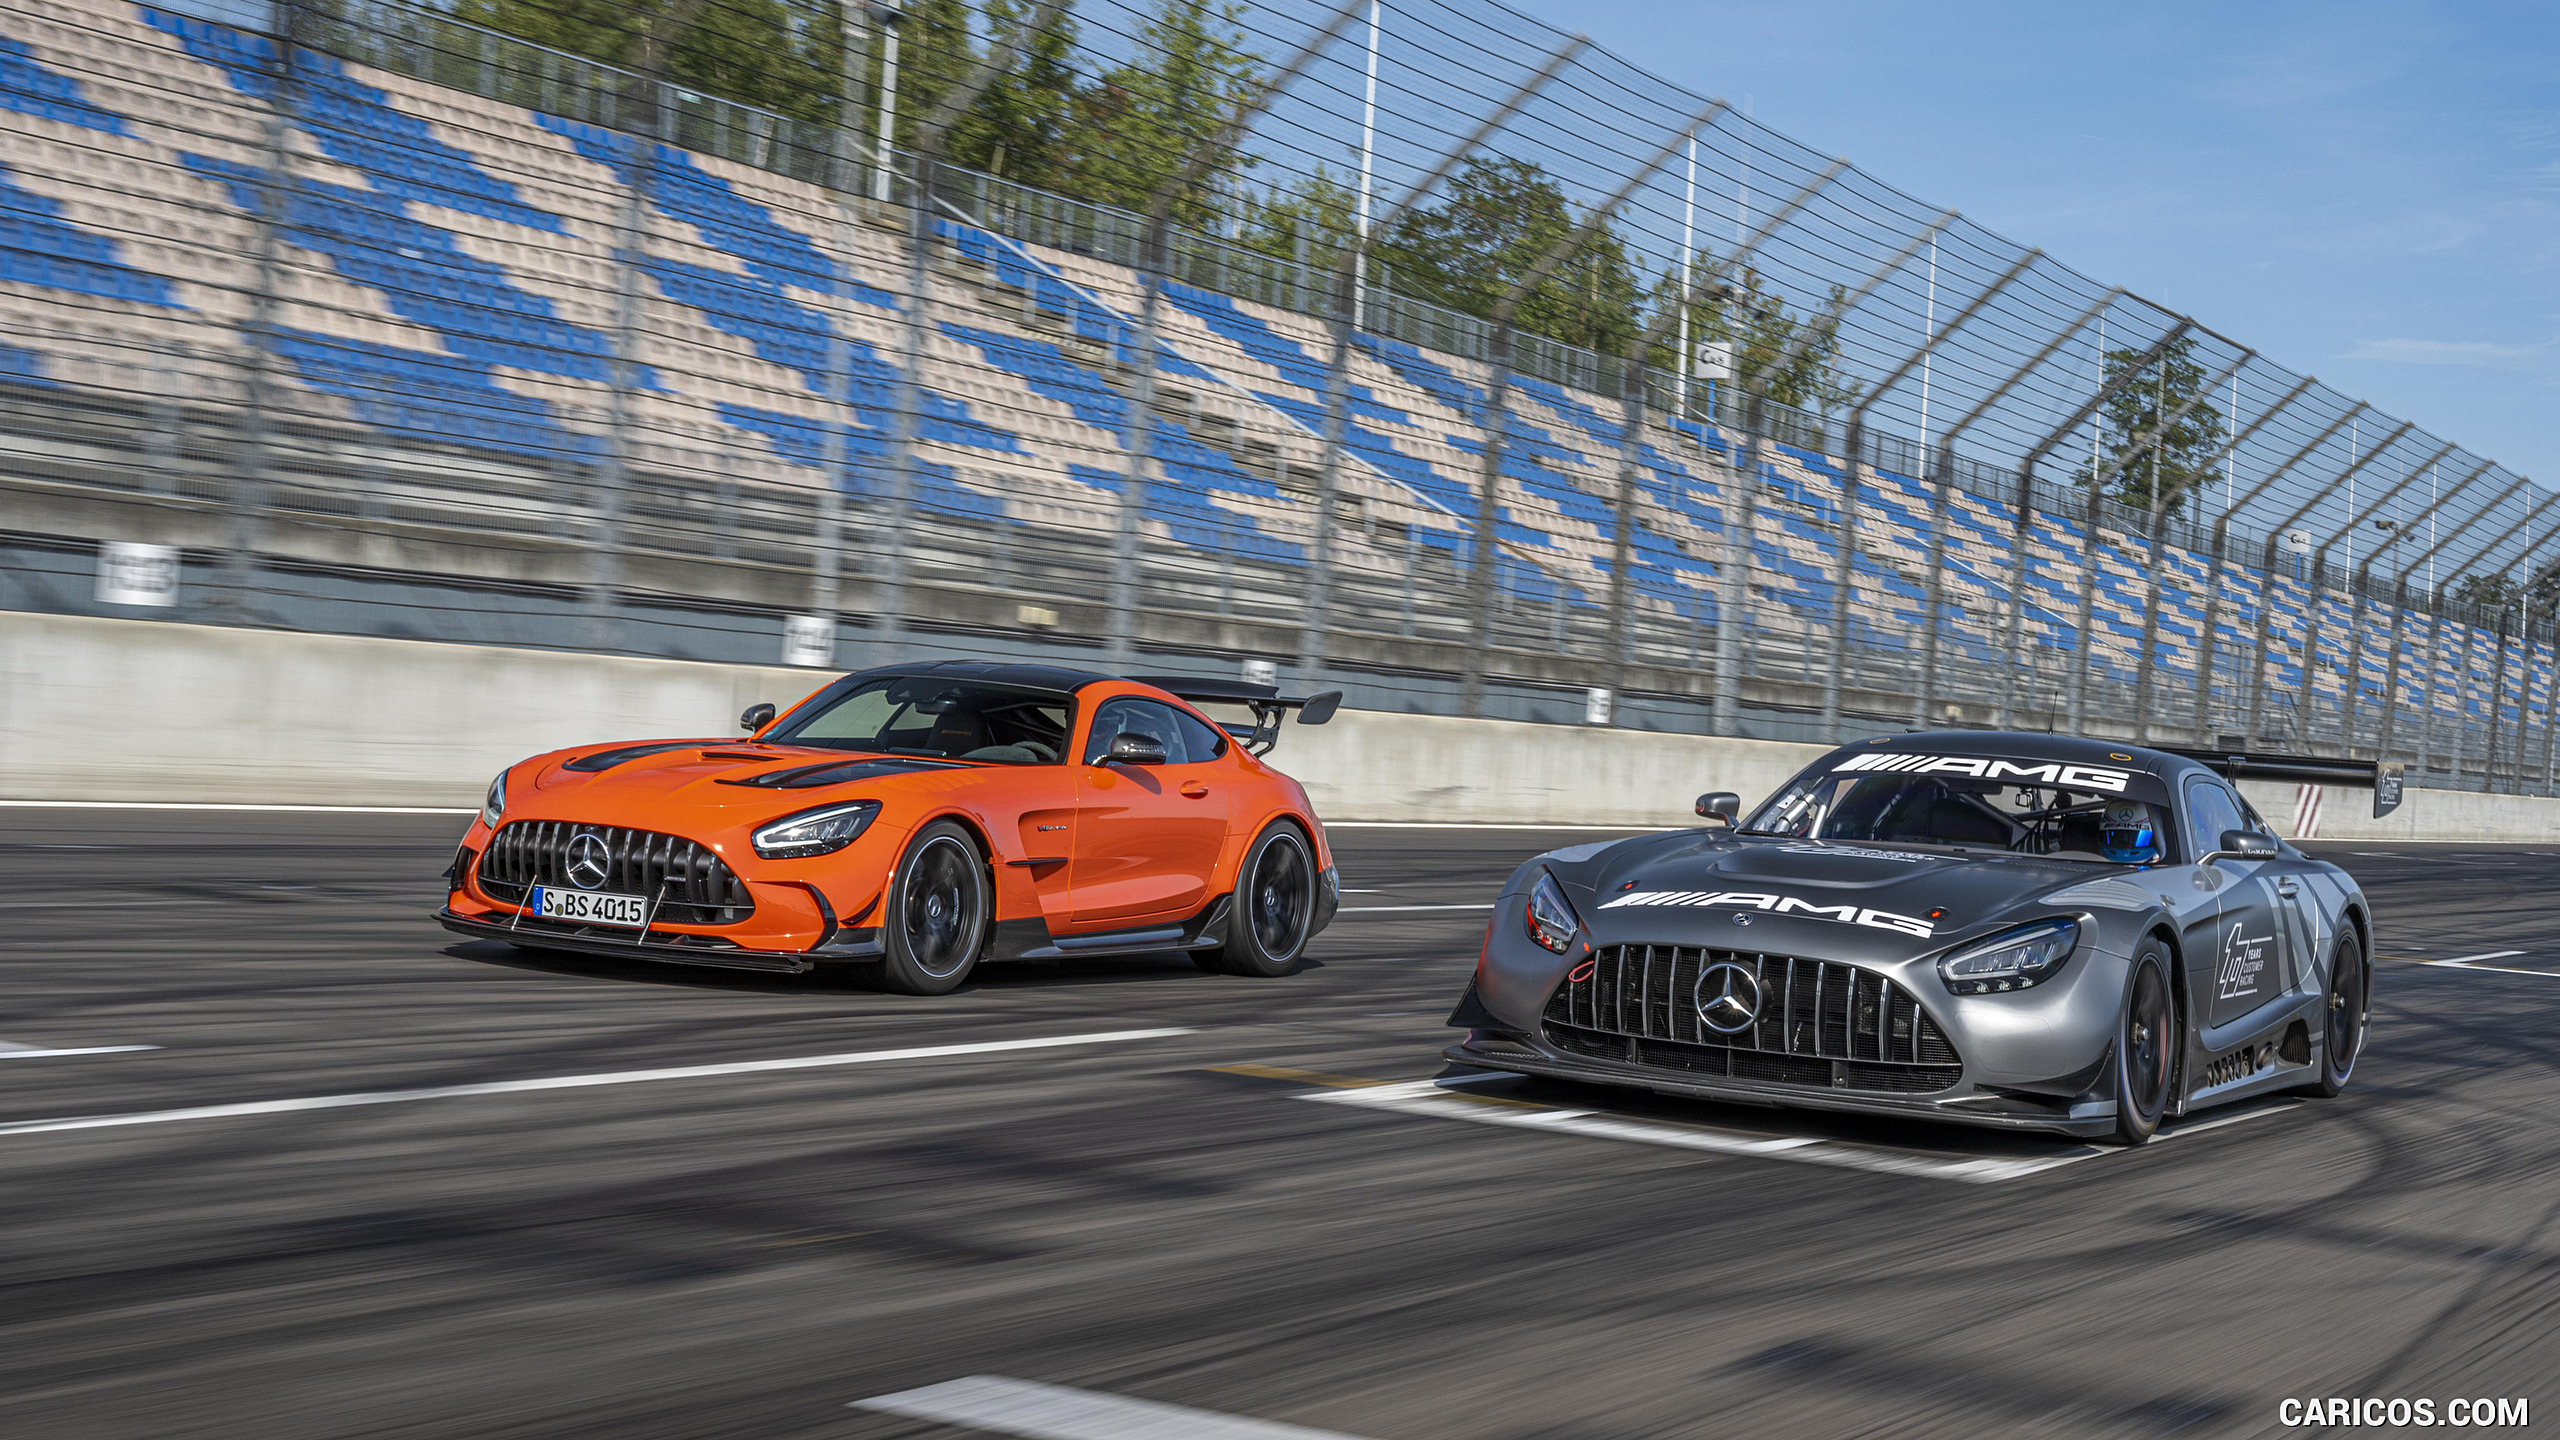 2021 Mercedes-AMG GT Black Series (Color: Magma Beam) and AMG GT3 Racing Car, #145 of 215